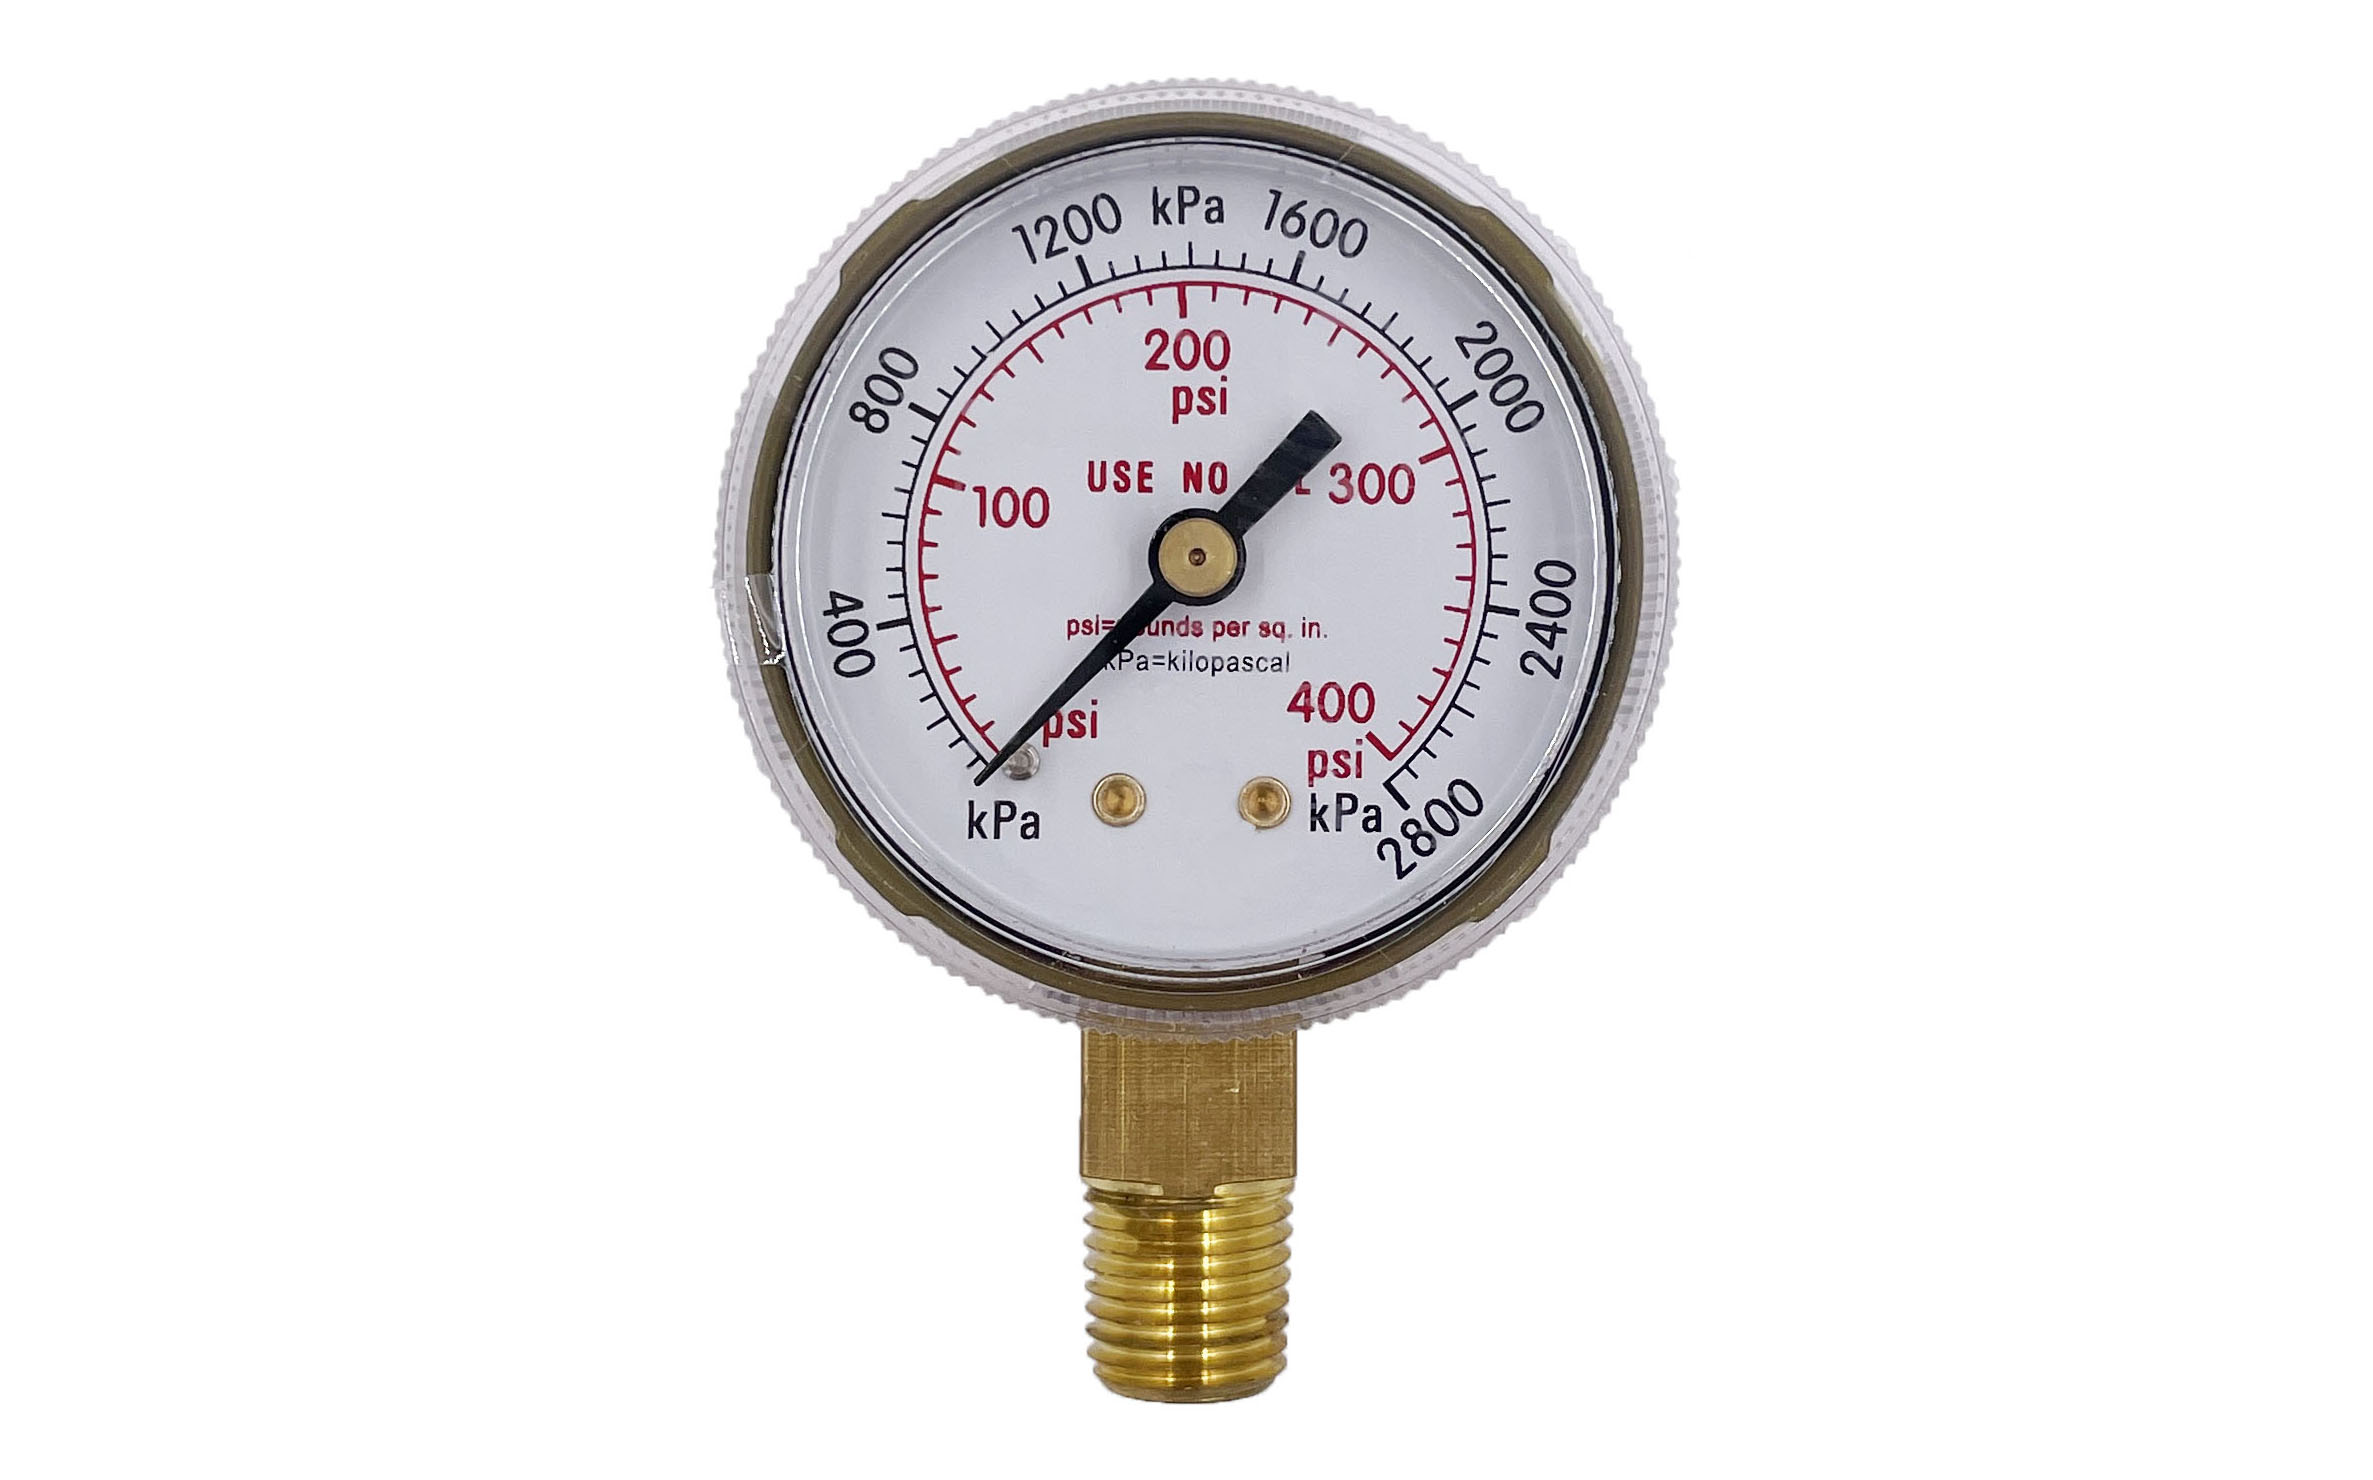 Chicago a company bought a batch of pressure gauges